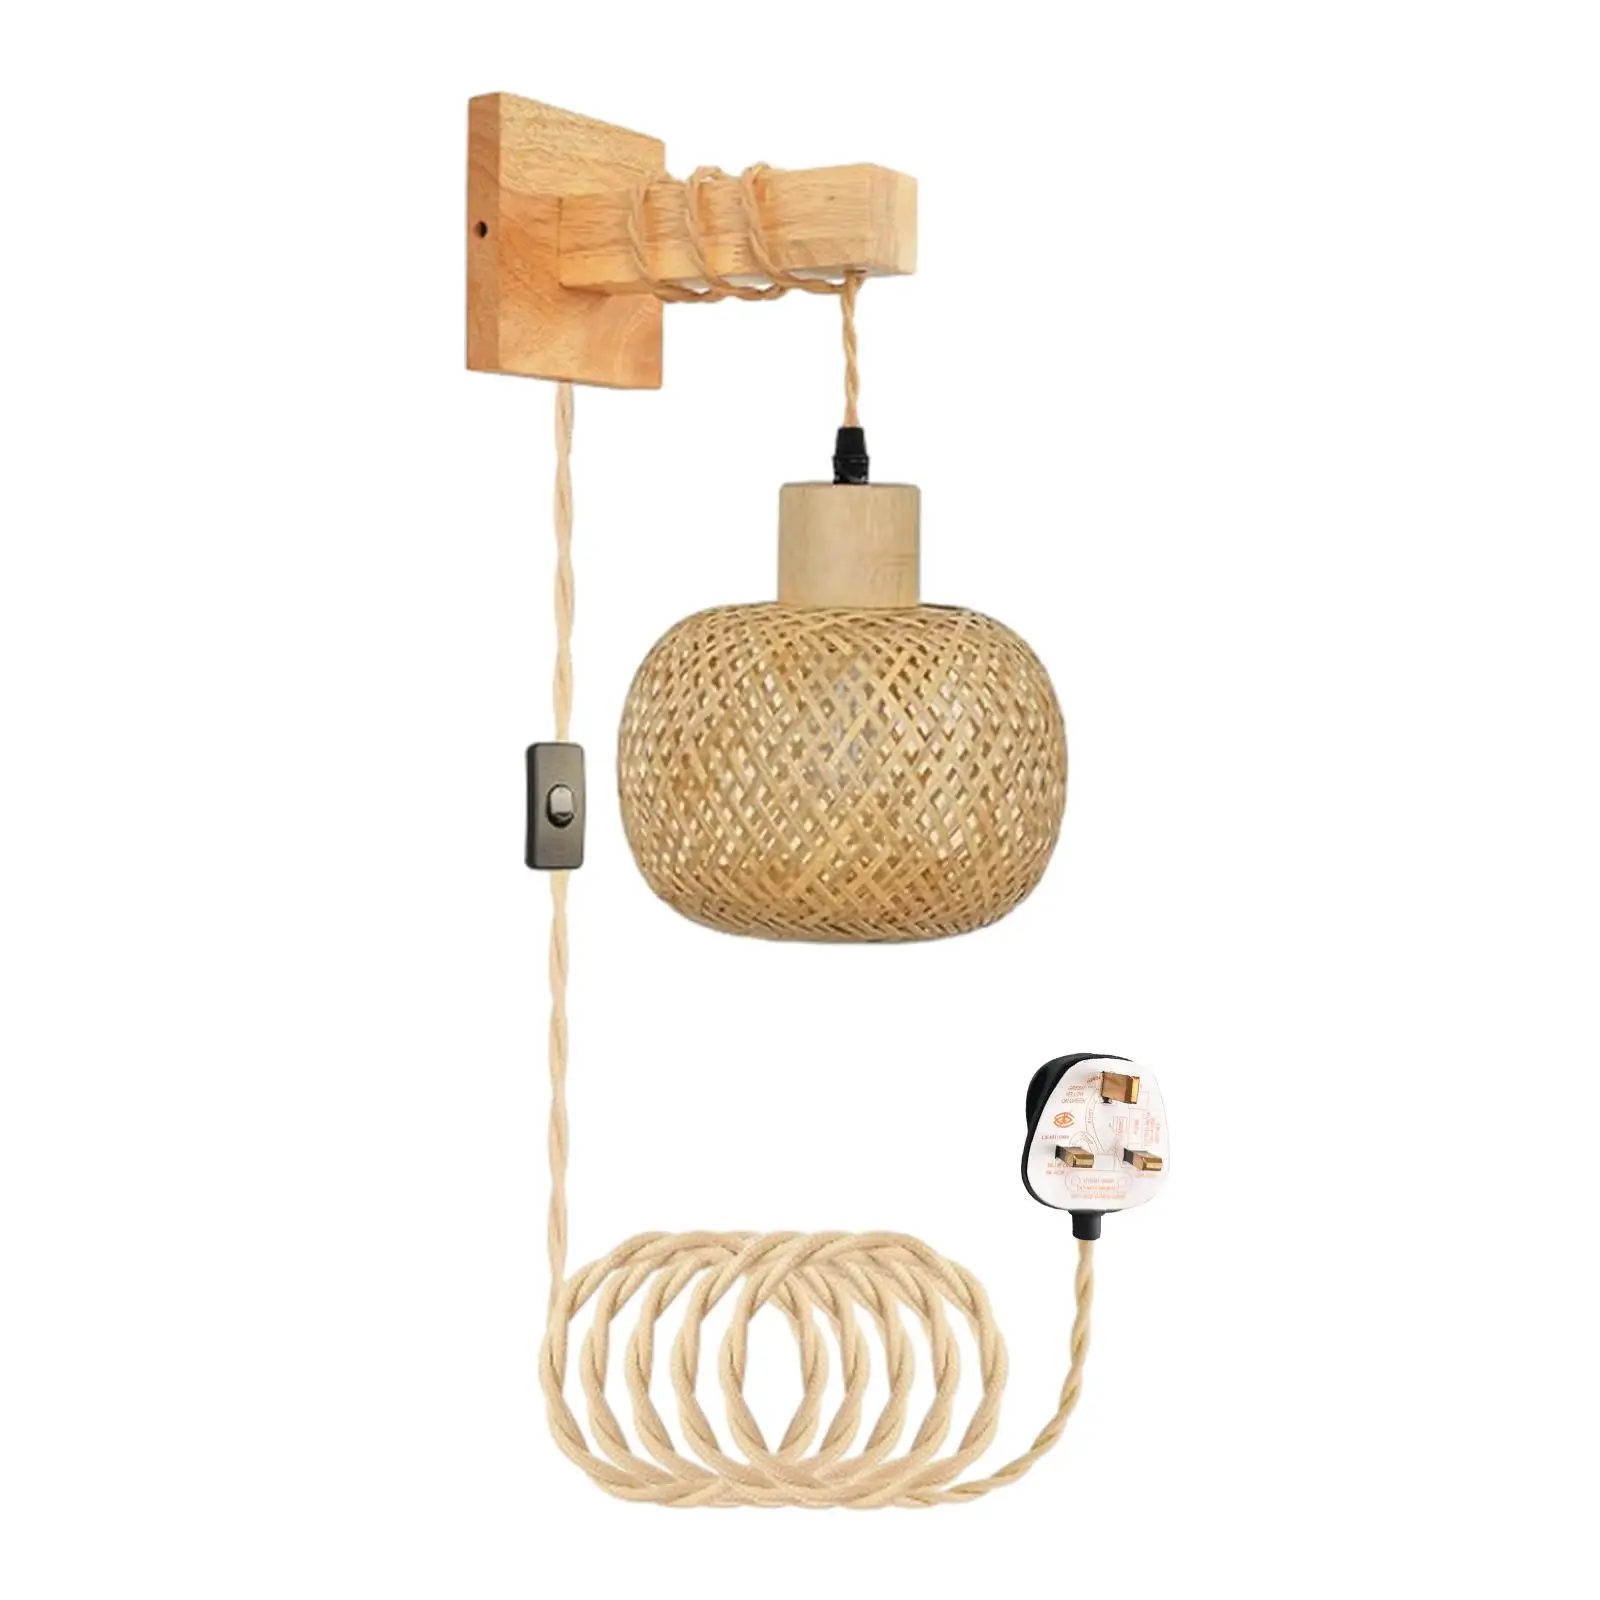 Bamboo Wall Sconce Wall Mount Sconce E26 Base Hand Woven Bathroom Vanity Wall Light for Home Stairs Bathroom Living Room Balcony